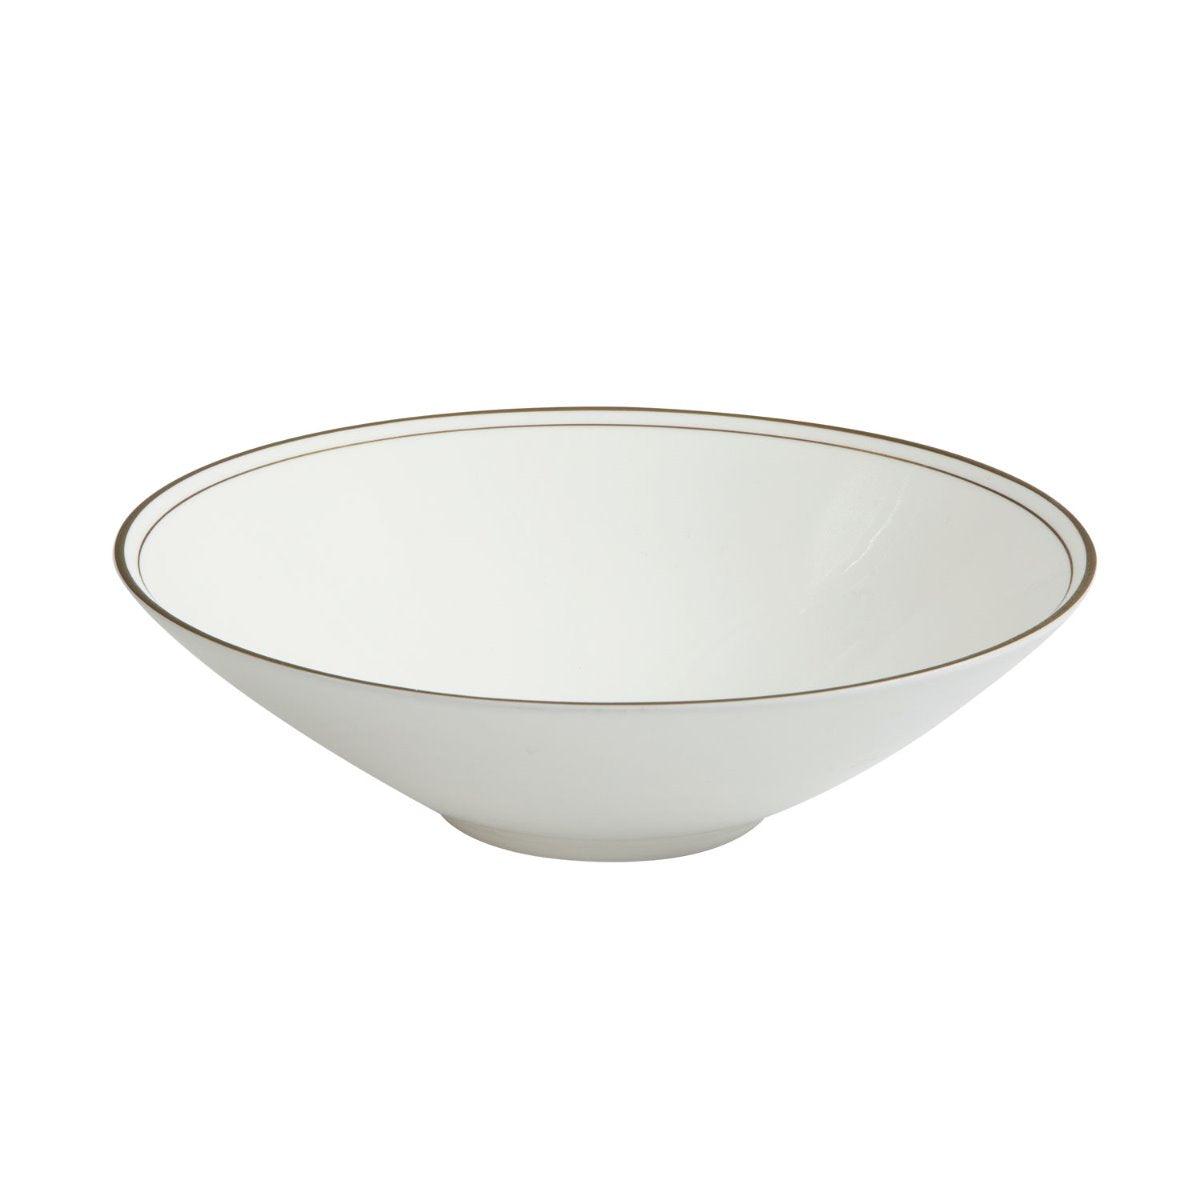 [Neo Gold] 6.75" Cooking Bowl, 1pc - HANKOOK